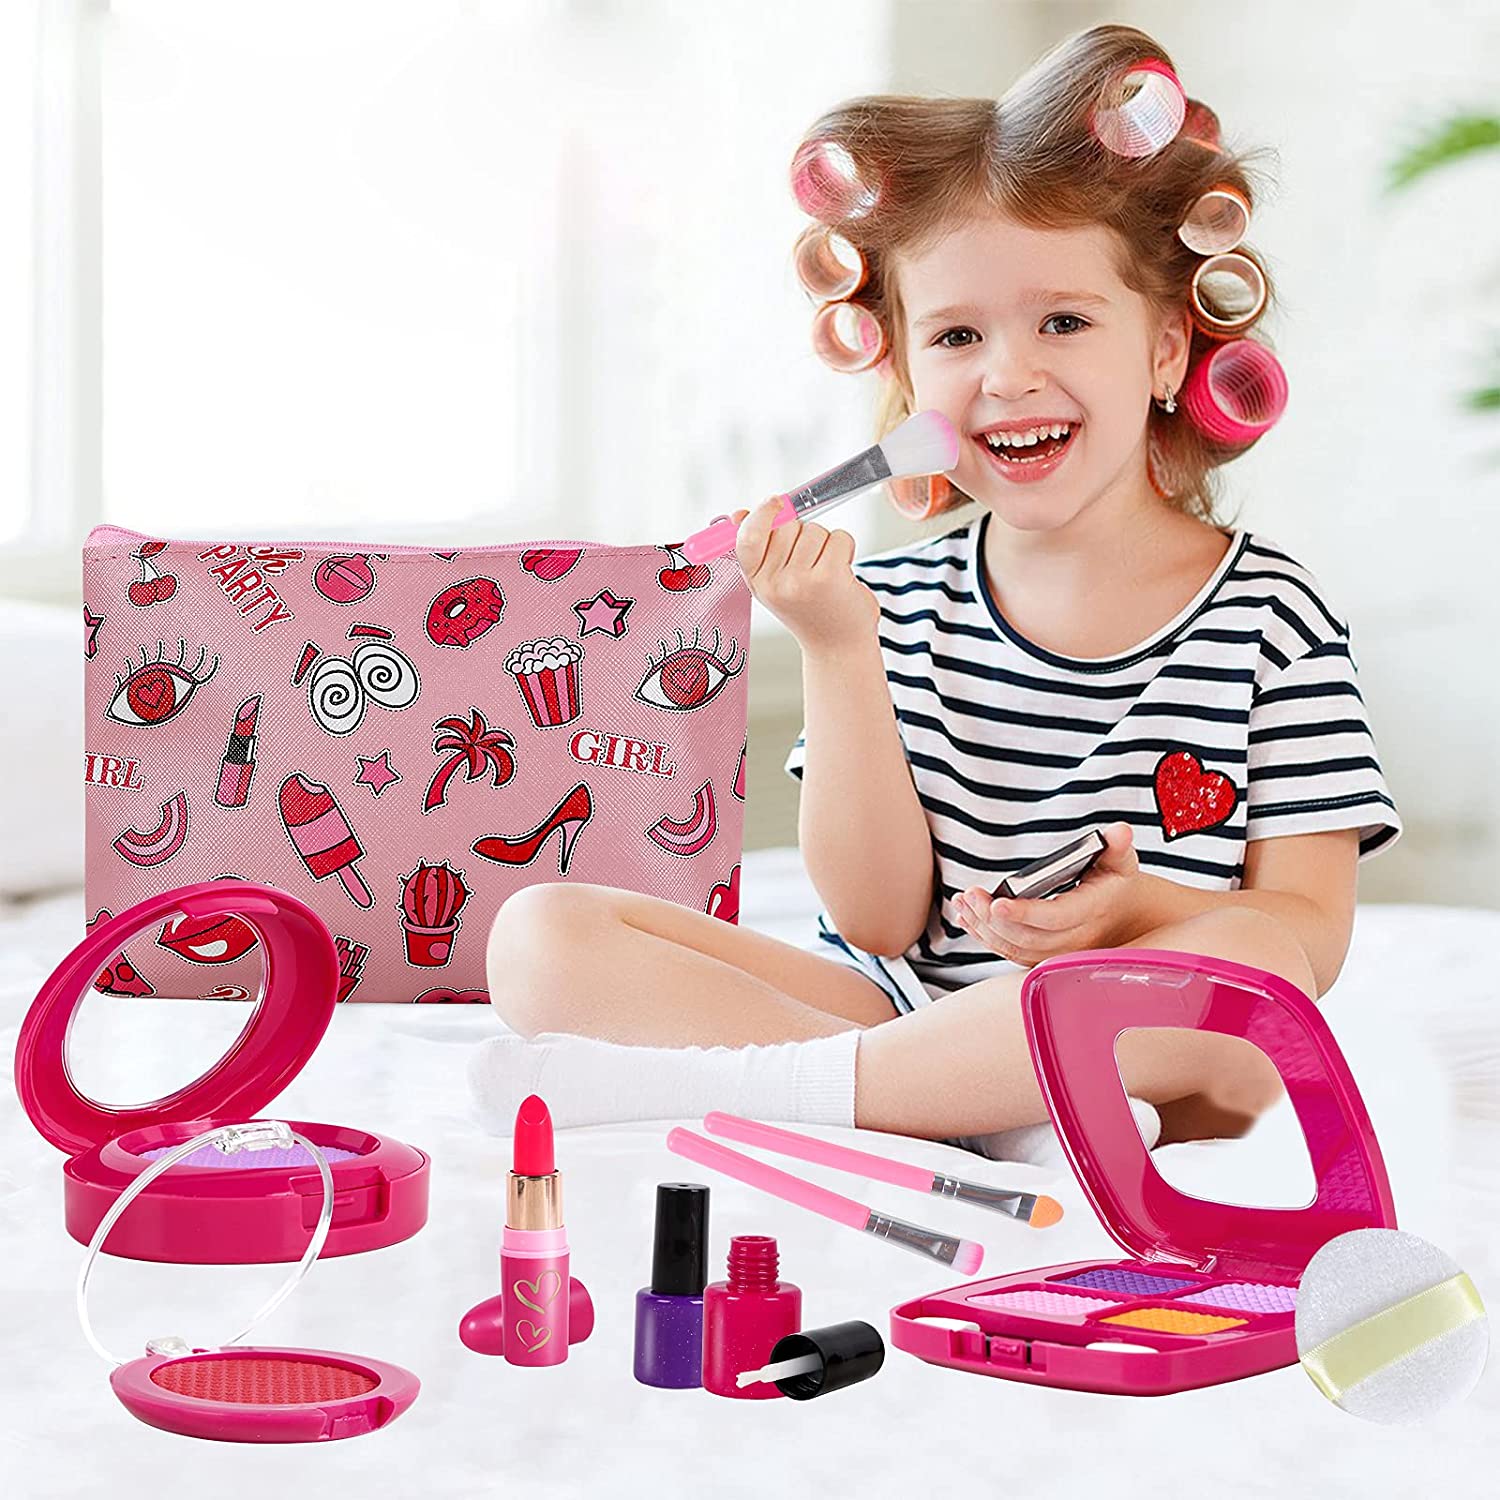 TEMI Kids Makeup Toys for 3 4 5 6 7 8 Girls - Pretend Play Make Up for  Girls Ages 6-8, Dress-Up Toddler Toy Flower Shaped Case, Christmas Birthday